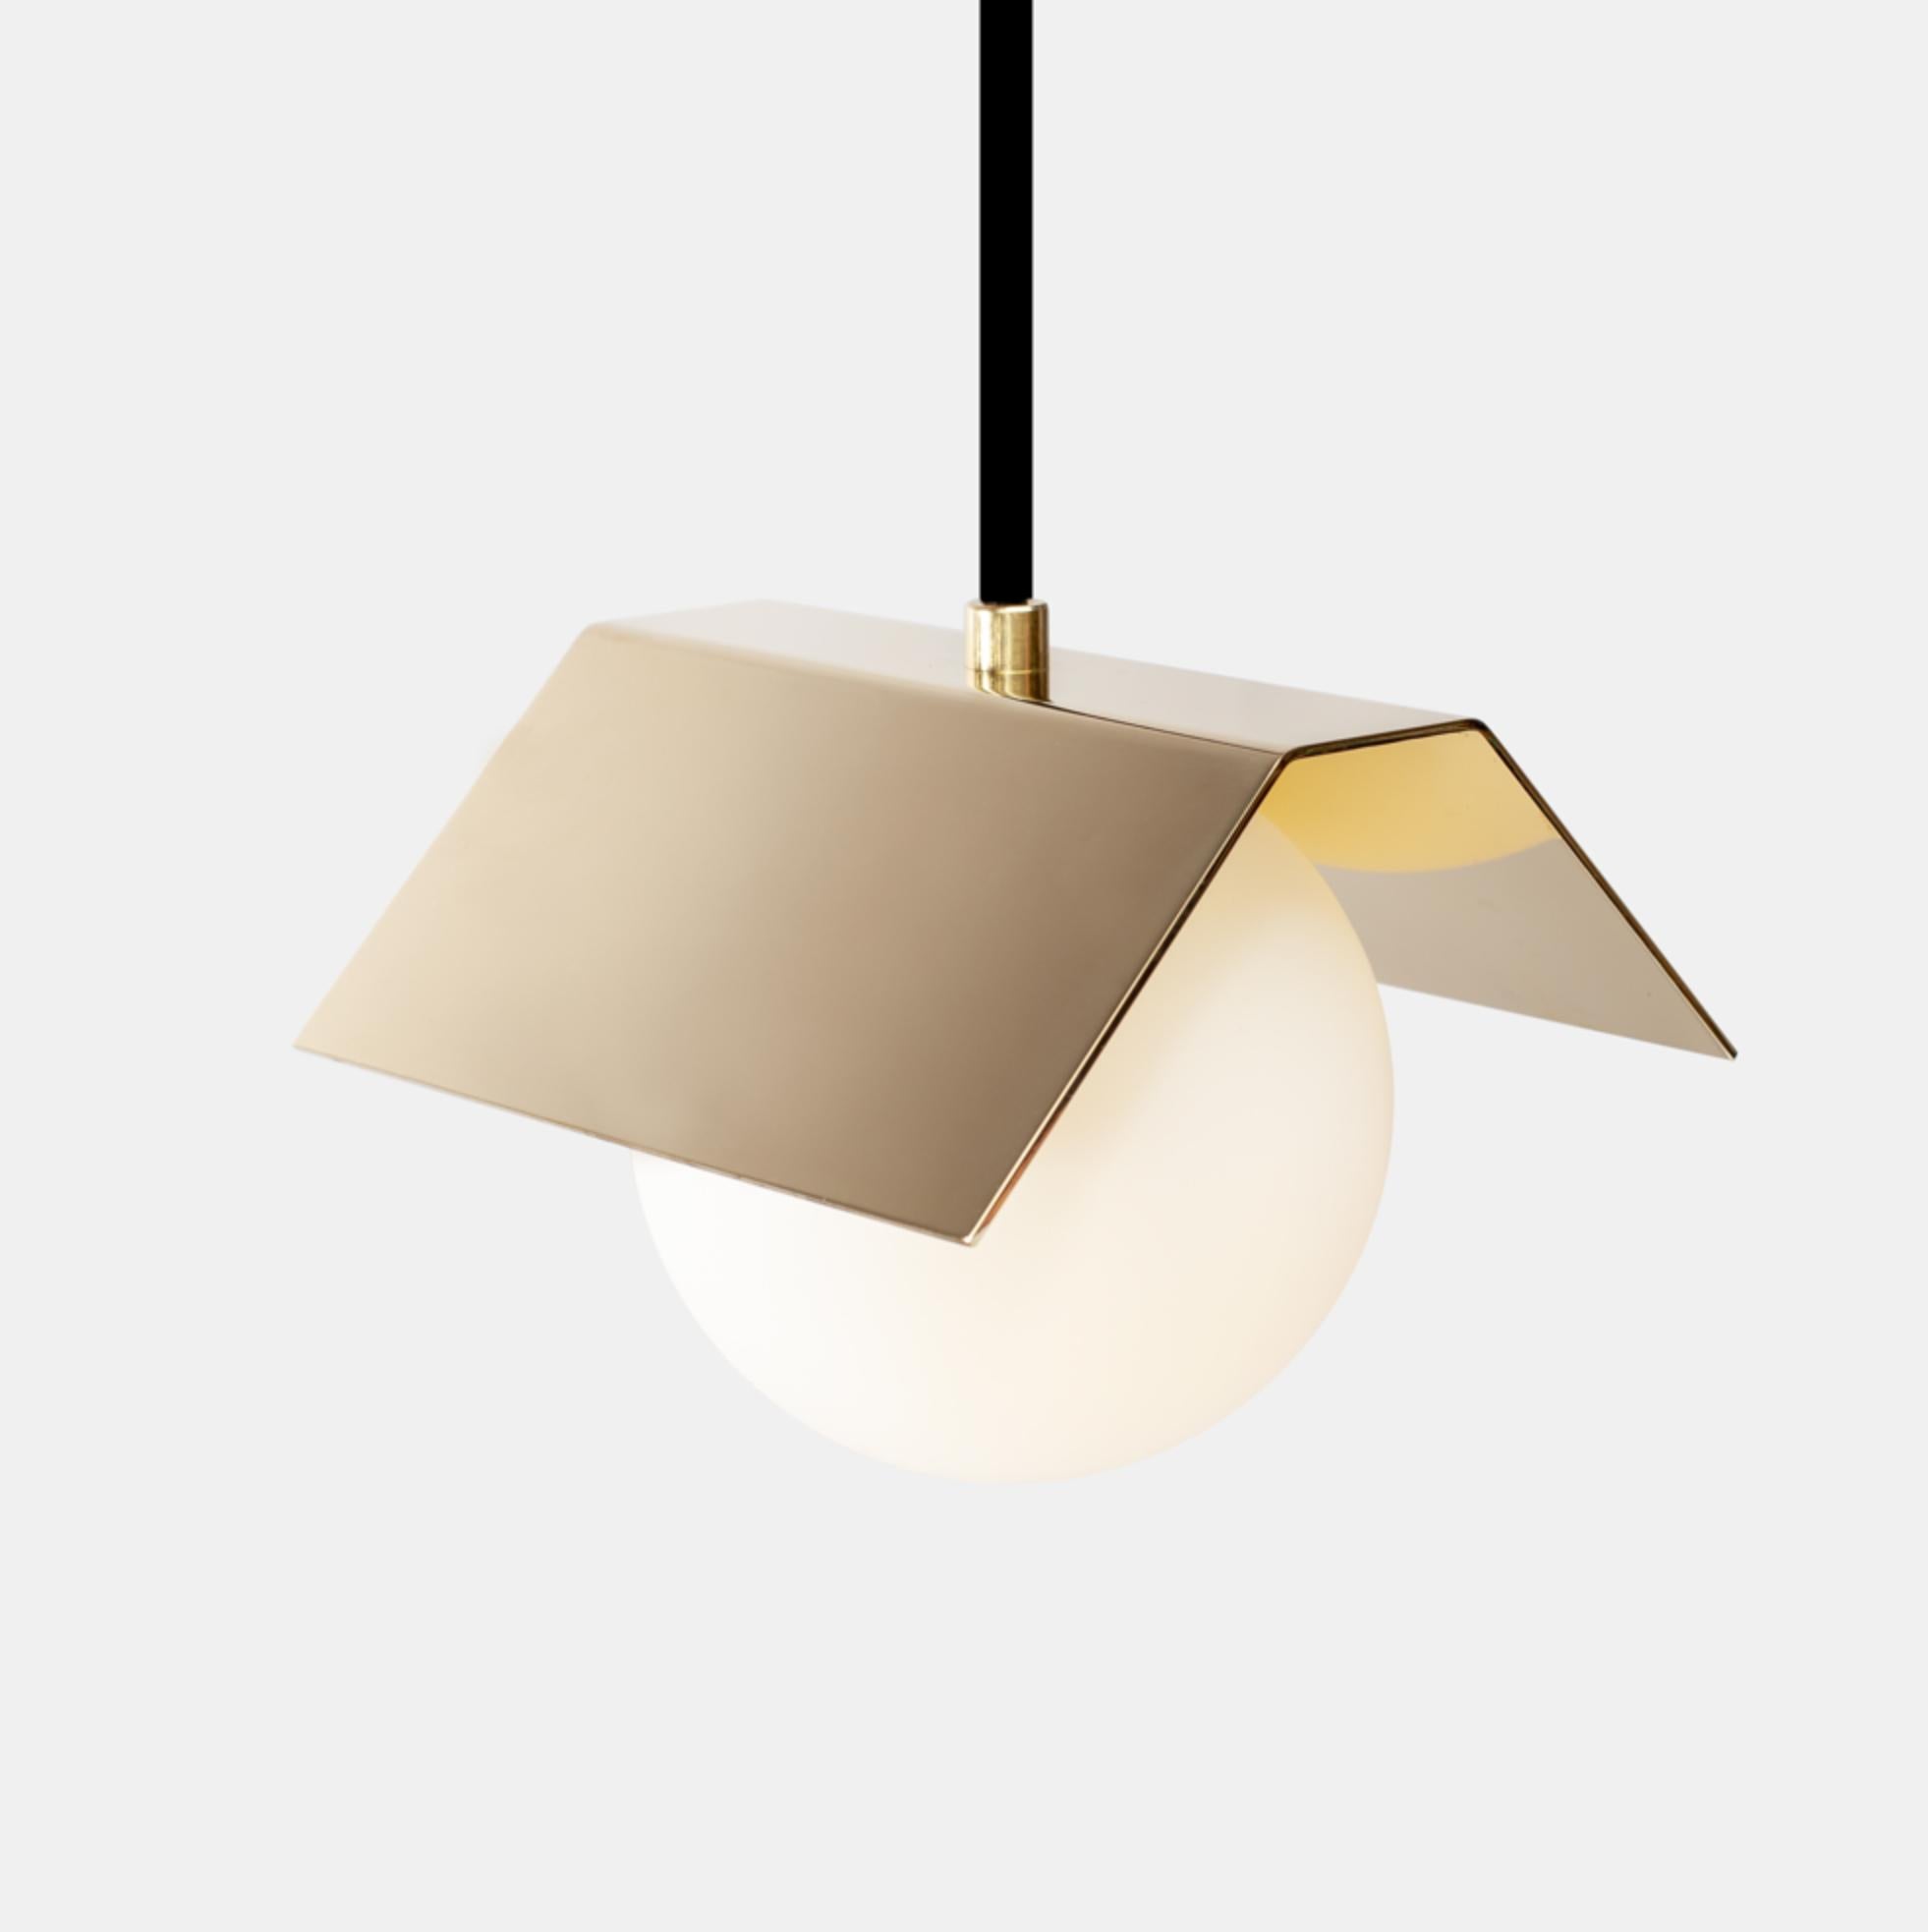 Twain solid brass suspended light by Lexavala
Dimensions: W 16 x D 16 x H 13 cm 
Materials: Brass, glass.

There are two lenghts of socket covers, extending over the LED. Two short are to be found in Suspended and Surface, and one long in the